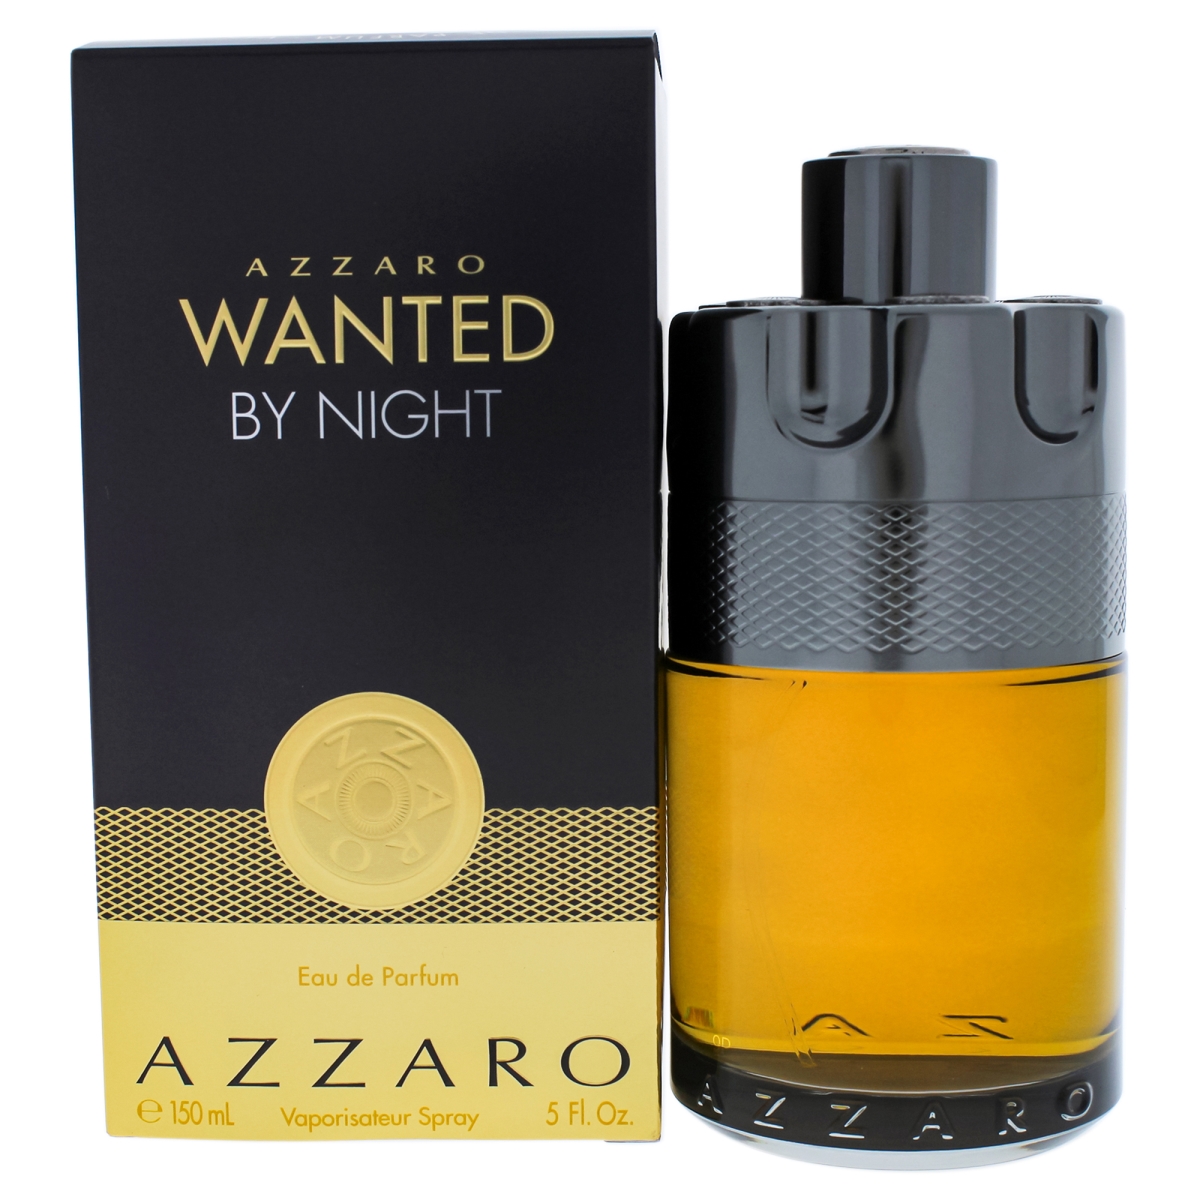 I0091009 Wanted By Night Edp Spray For Men - 5.1 Oz